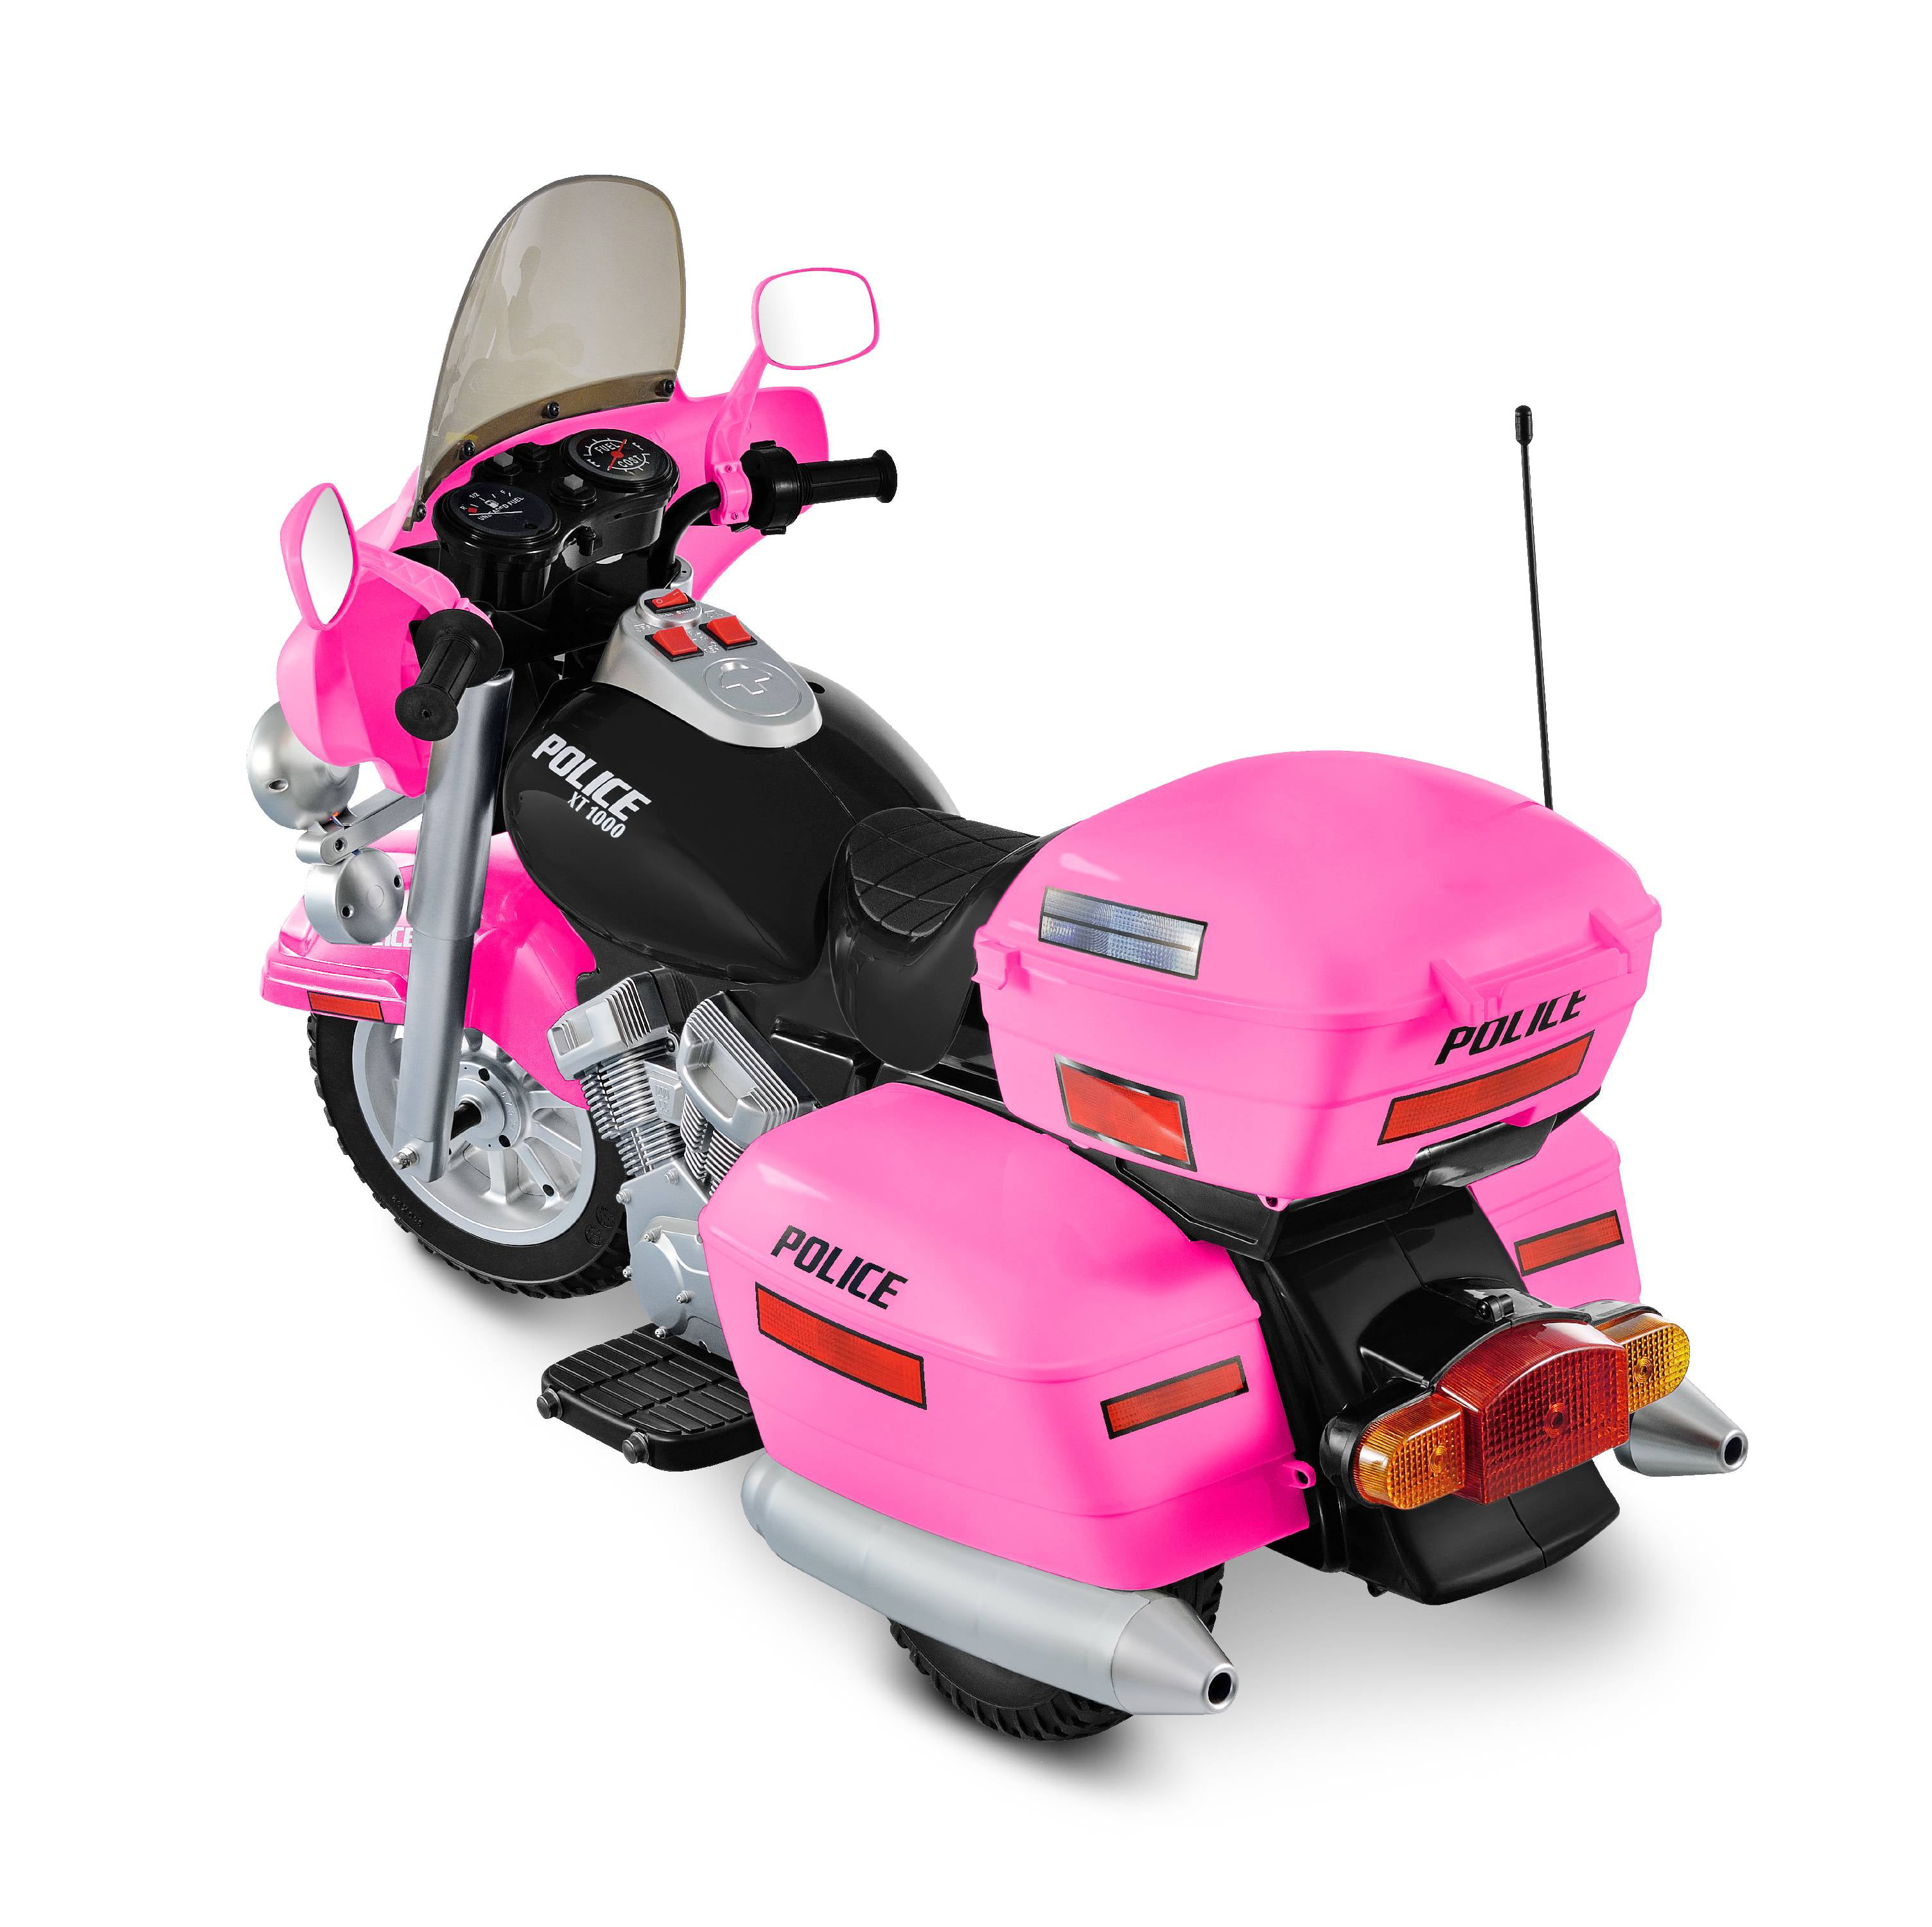 Girls Motorized Motorcycle 12-Volt Battery-Powered Kid's Ride-on Toy Pink NEW | eBay